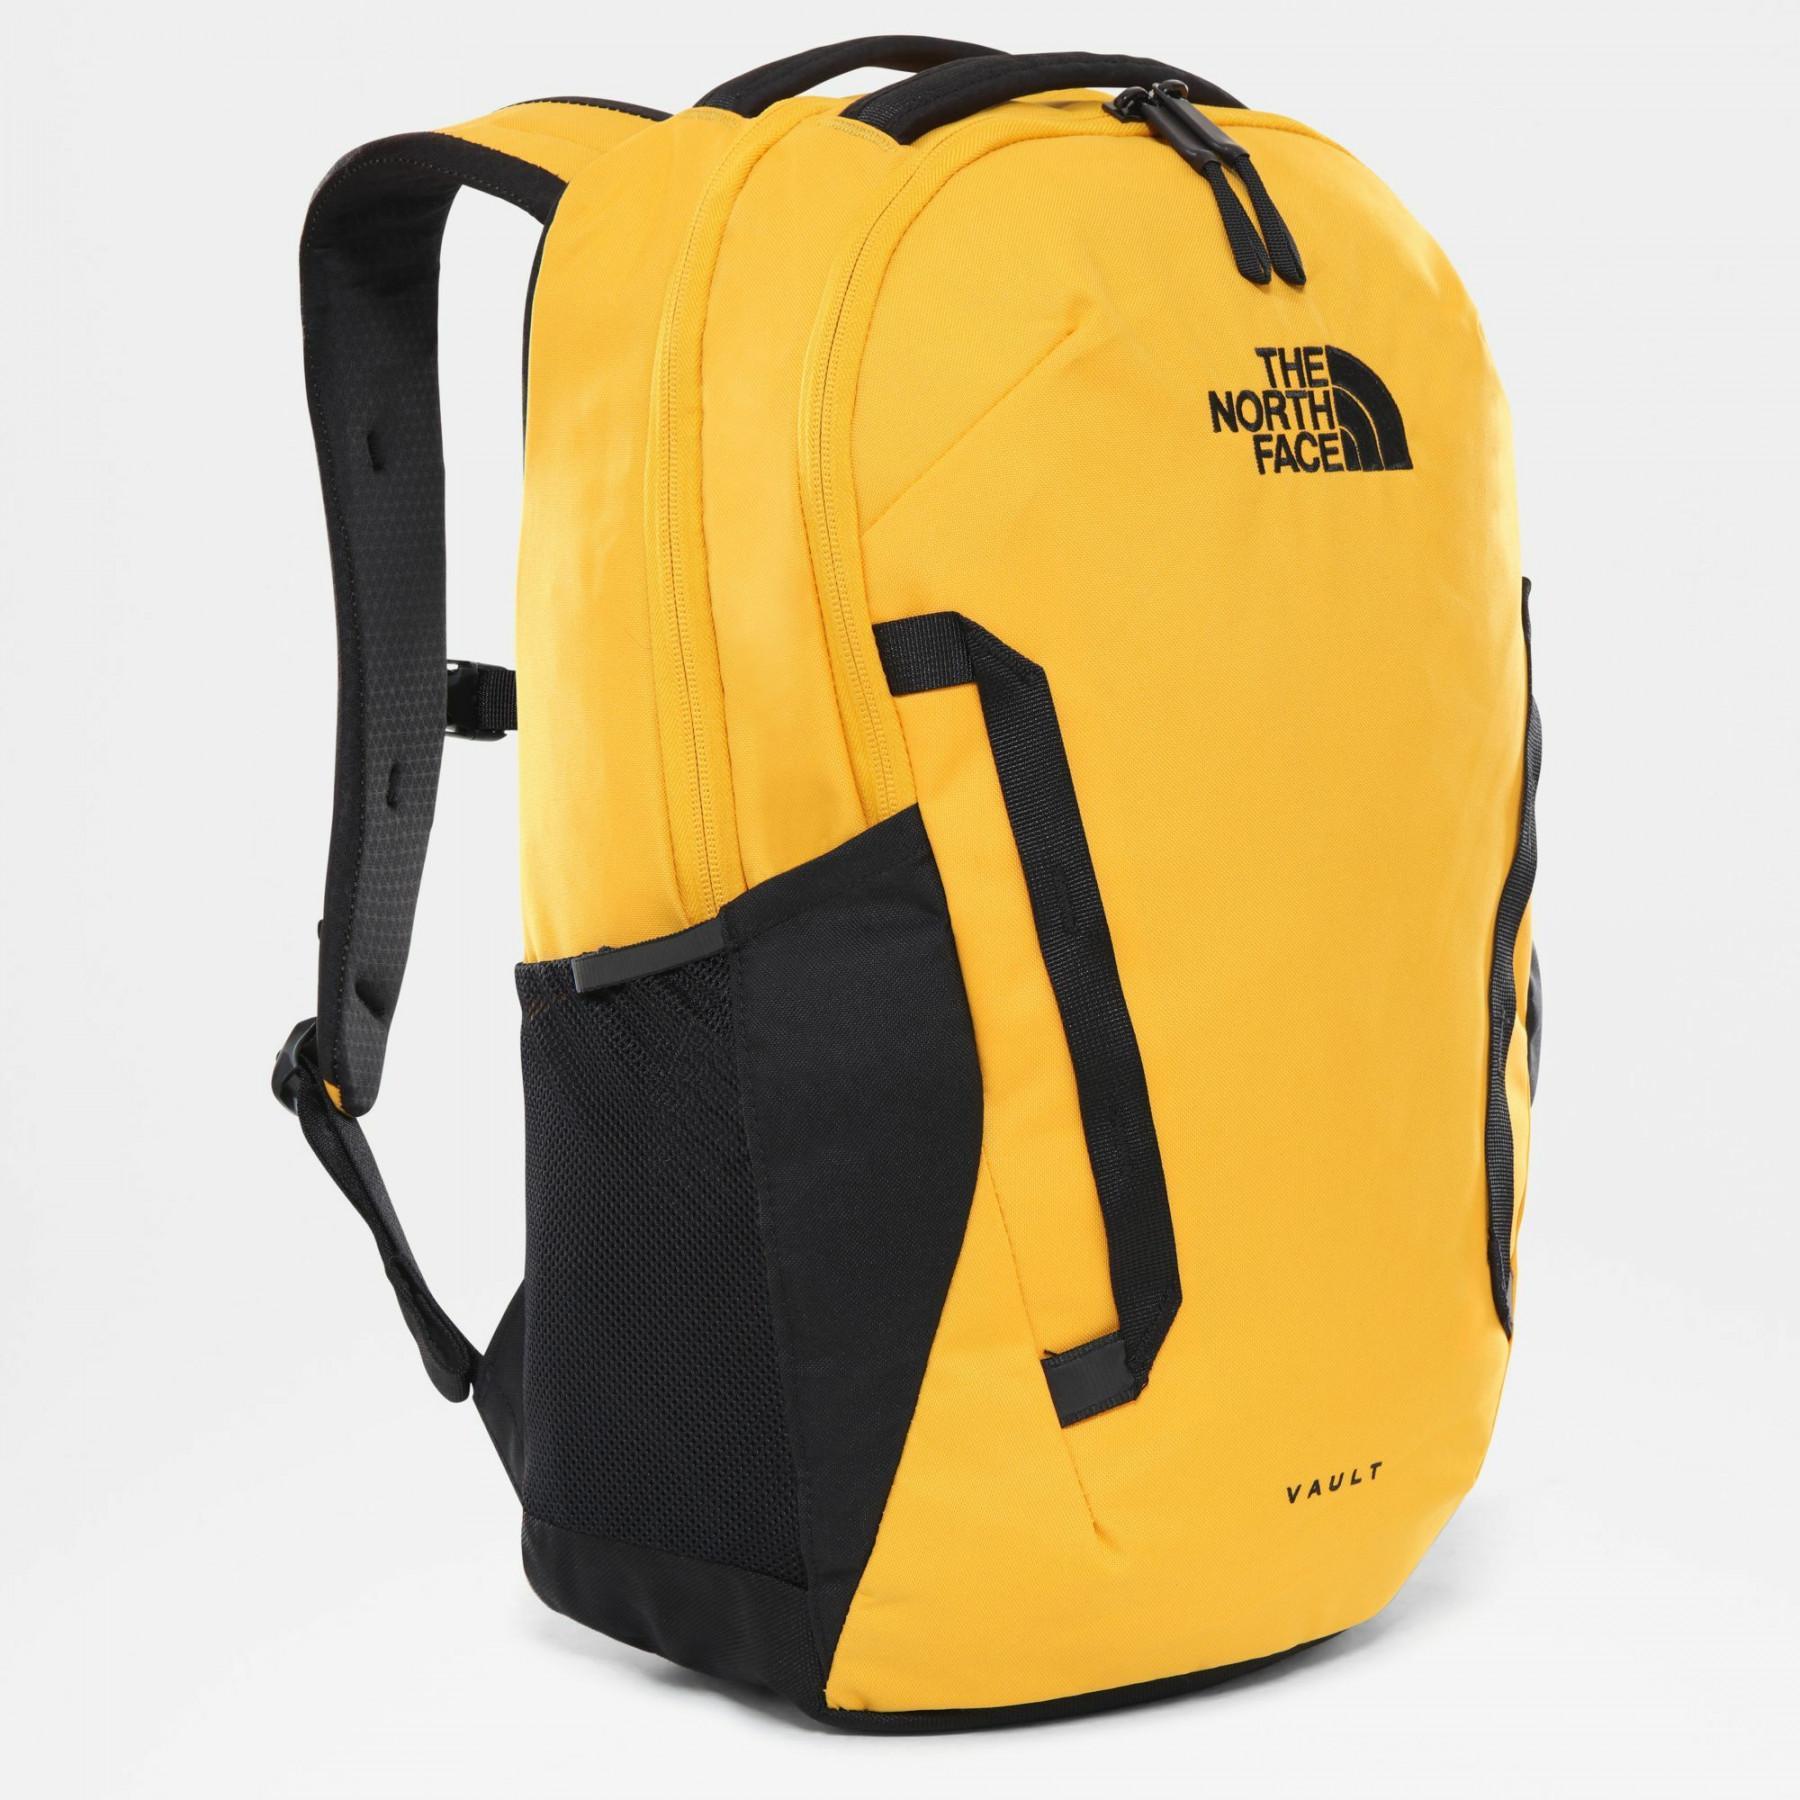 Rugzak The North Face Vault